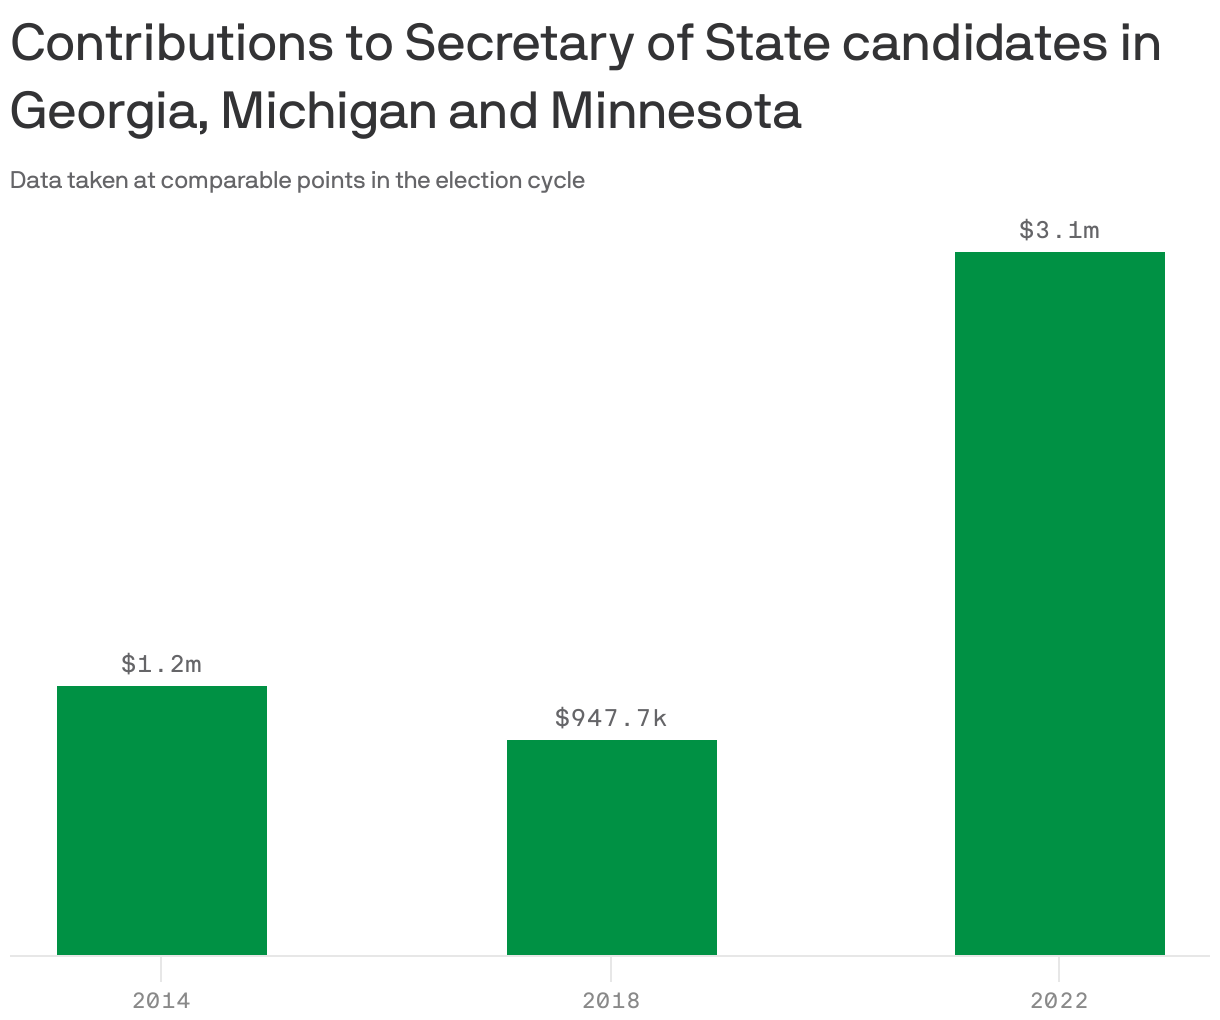 Contributions to Secretary of State candidates in Georgia, Michigan and Minnesota